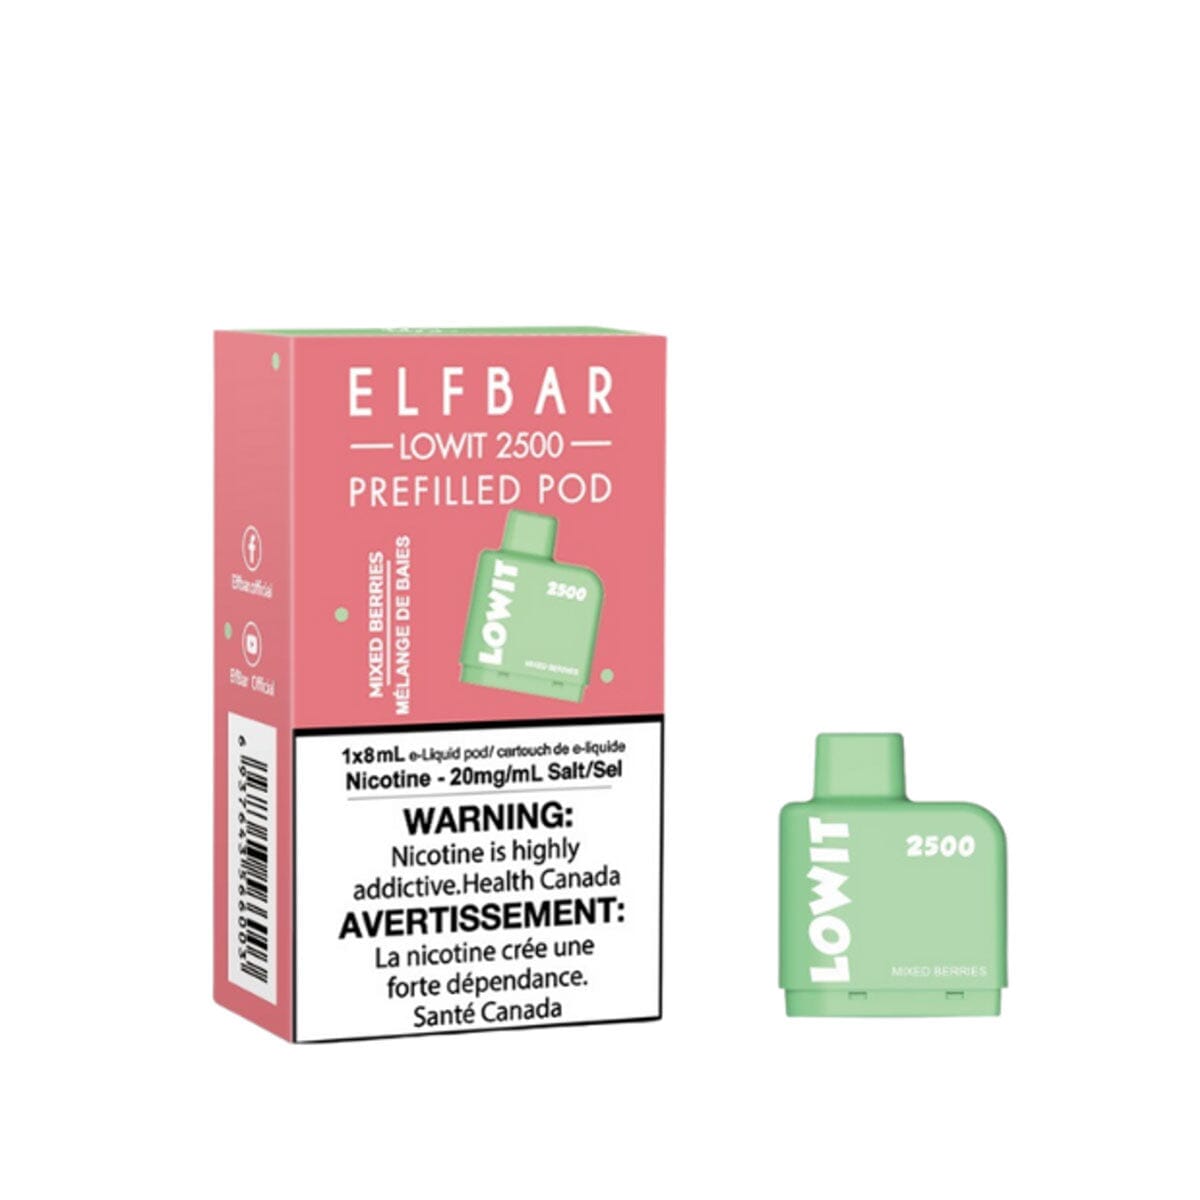 Elf Bar Lowit 2500 Mixed Berries Pre Filled Disposable Pod Pre-filled Pod Elf Bar 20mg/mL 